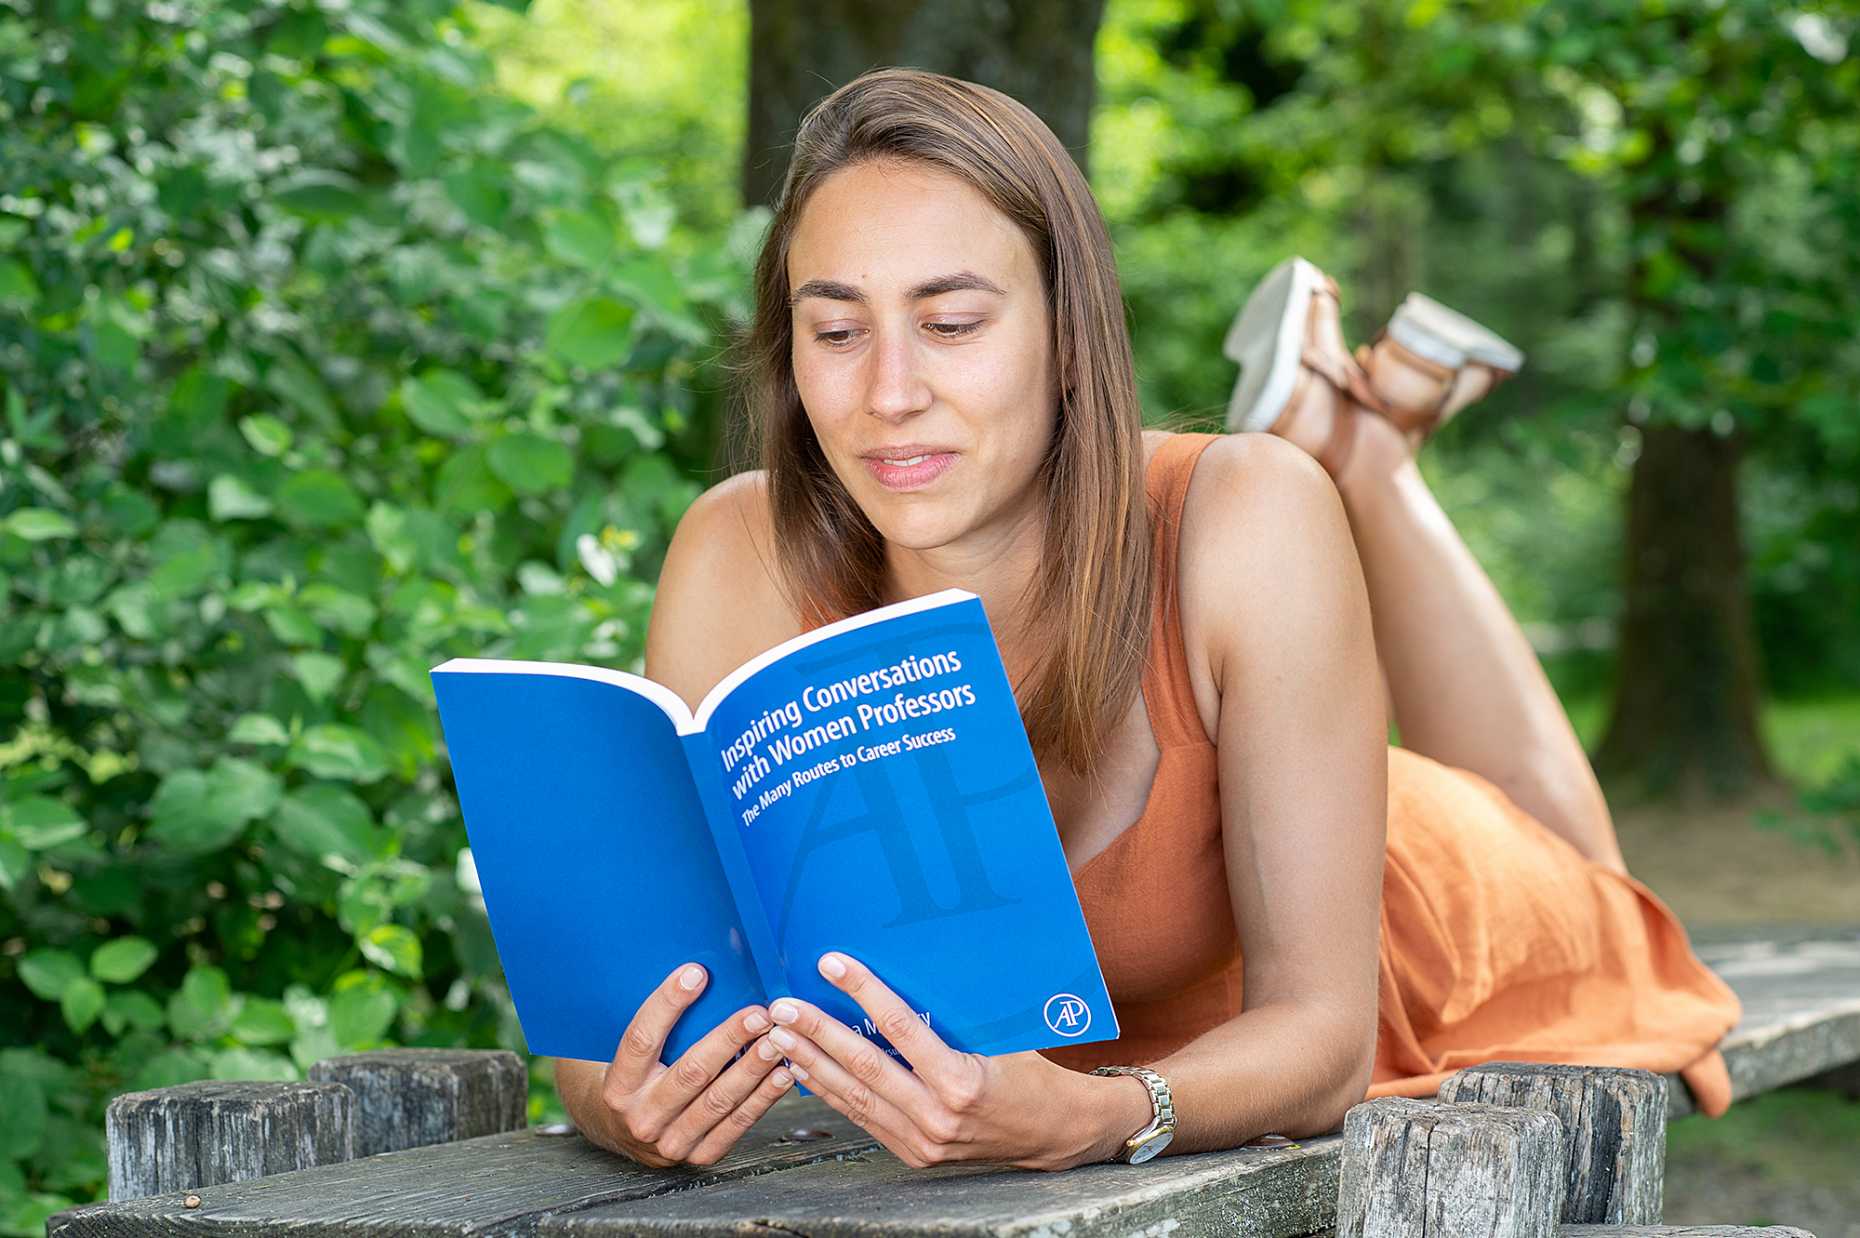 “Inspiring Conversations with Woman Professors” – Plan your future career steps in research. Easily written, the book is also suitable for reading on the move. (Photo: ETH Zurich/D-PHYS Heidi Hostettler)